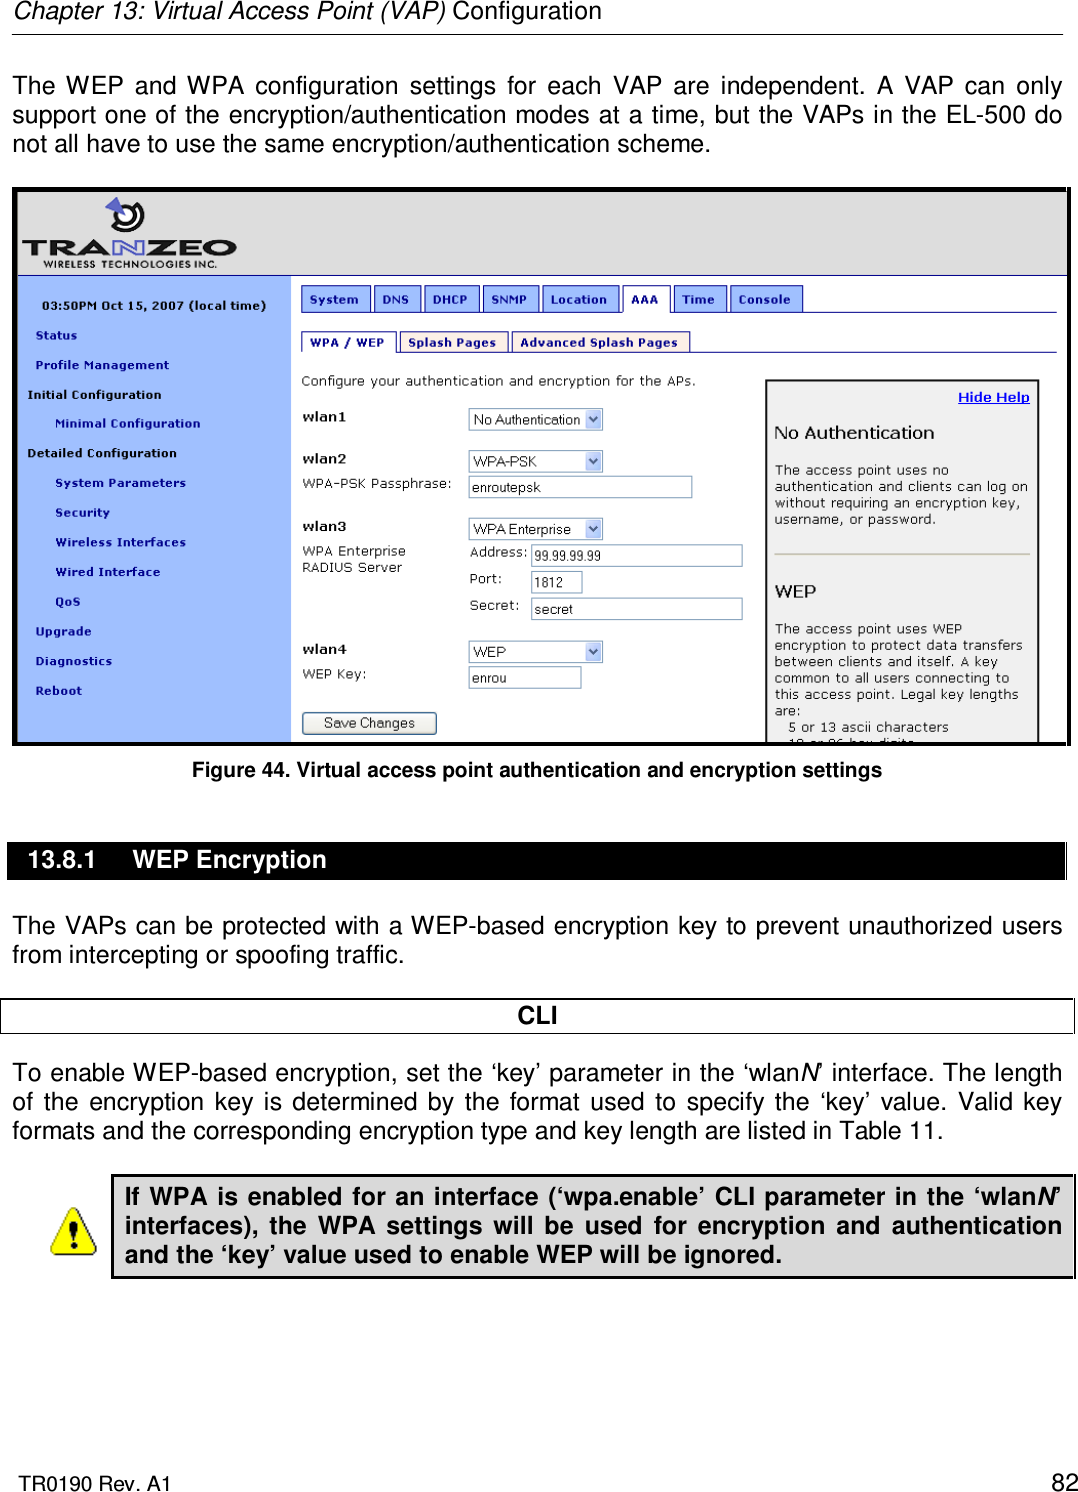 Chapter 13: Virtual Access Point (VAP) Configuration  TR0190 Rev. A1    82 The  WEP  and  WPA  configuration  settings  for  each  VAP  are  independent.  A  VAP  can  only support one of the encryption/authentication modes at a time, but the VAPs in the EL-500 do not all have to use the same encryption/authentication scheme.   Figure 44. Virtual access point authentication and encryption settings 13.8.1  WEP Encryption The VAPs can be protected with a WEP-based encryption key to prevent unauthorized users from intercepting or spoofing traffic.   CLI To enable WEP-based encryption, set the ‘key’ parameter in the ‘wlanN’ interface. The length of  the  encryption  key is  determined  by  the  format  used  to  specify  the  ‘key’  value.  Valid  key formats and the corresponding encryption type and key length are listed in Table 11.  If WPA is enabled for an interface (‘wpa.enable’ CLI parameter in the ‘wlanN’ interfaces),  the  WPA  settings  will  be  used  for  encryption  and  authentication and the ‘key’ value used to enable WEP will be ignored.  